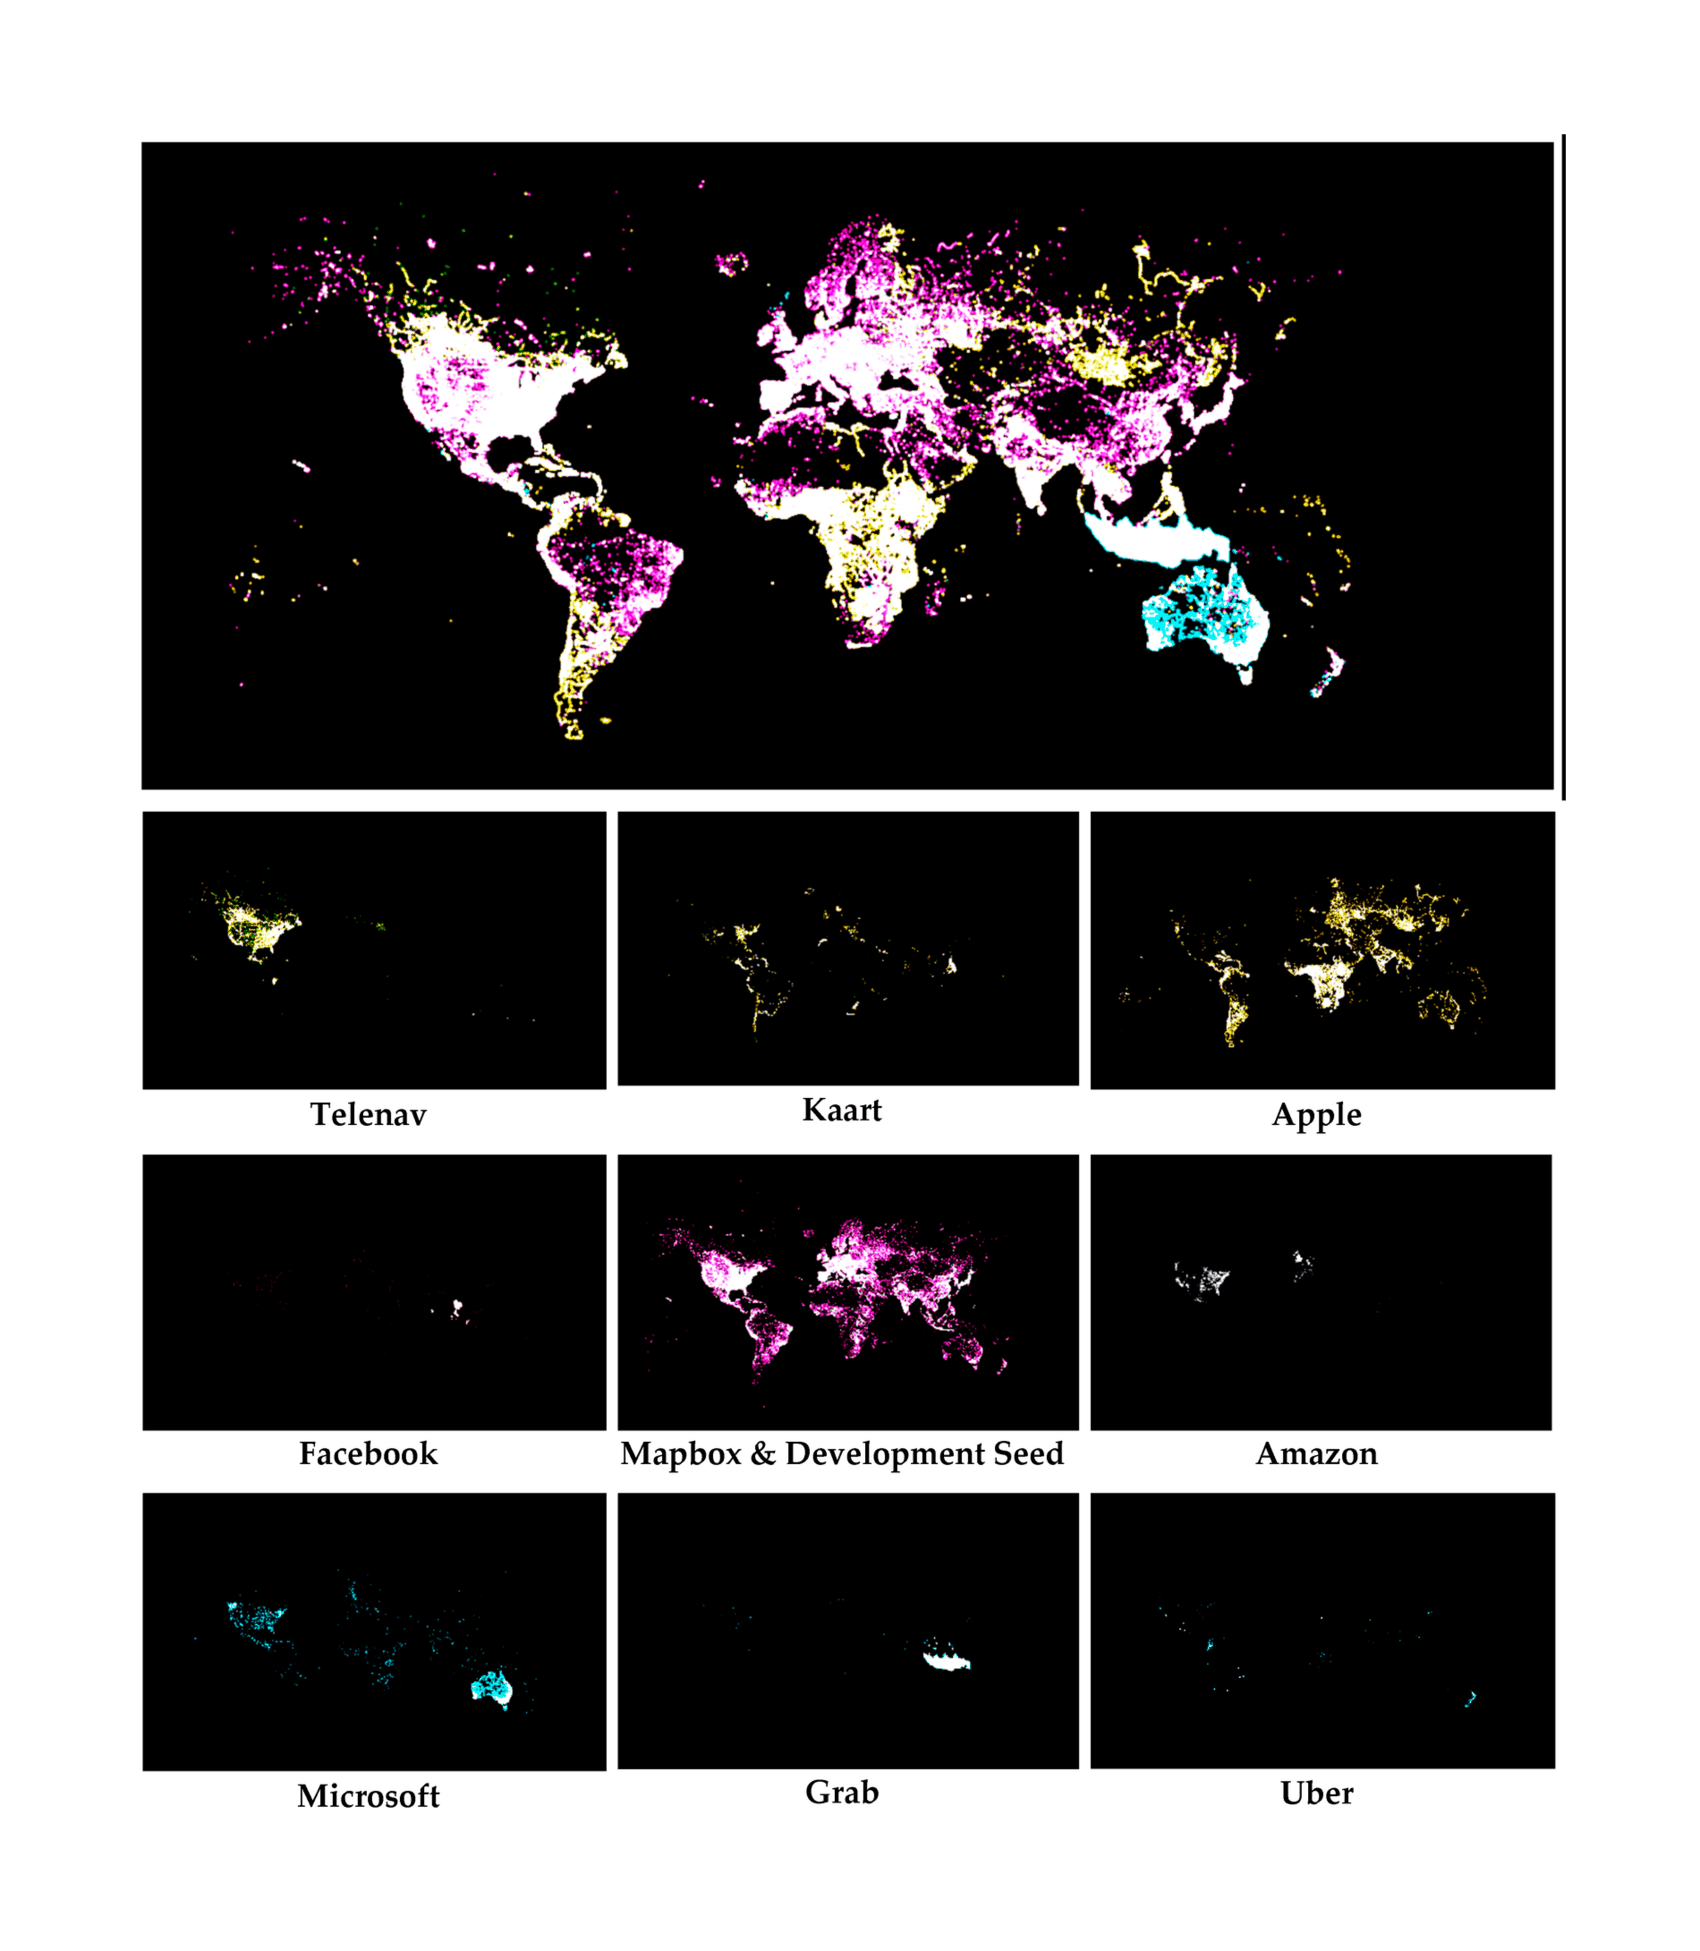 Figure 3: Where corporate editors are editing. The main map shows an aggregated view for all 10 companies. The sub figures show where each company is editing. In this map, we have combined the Mapbox and Development Seed teams because they merged in late 2017.